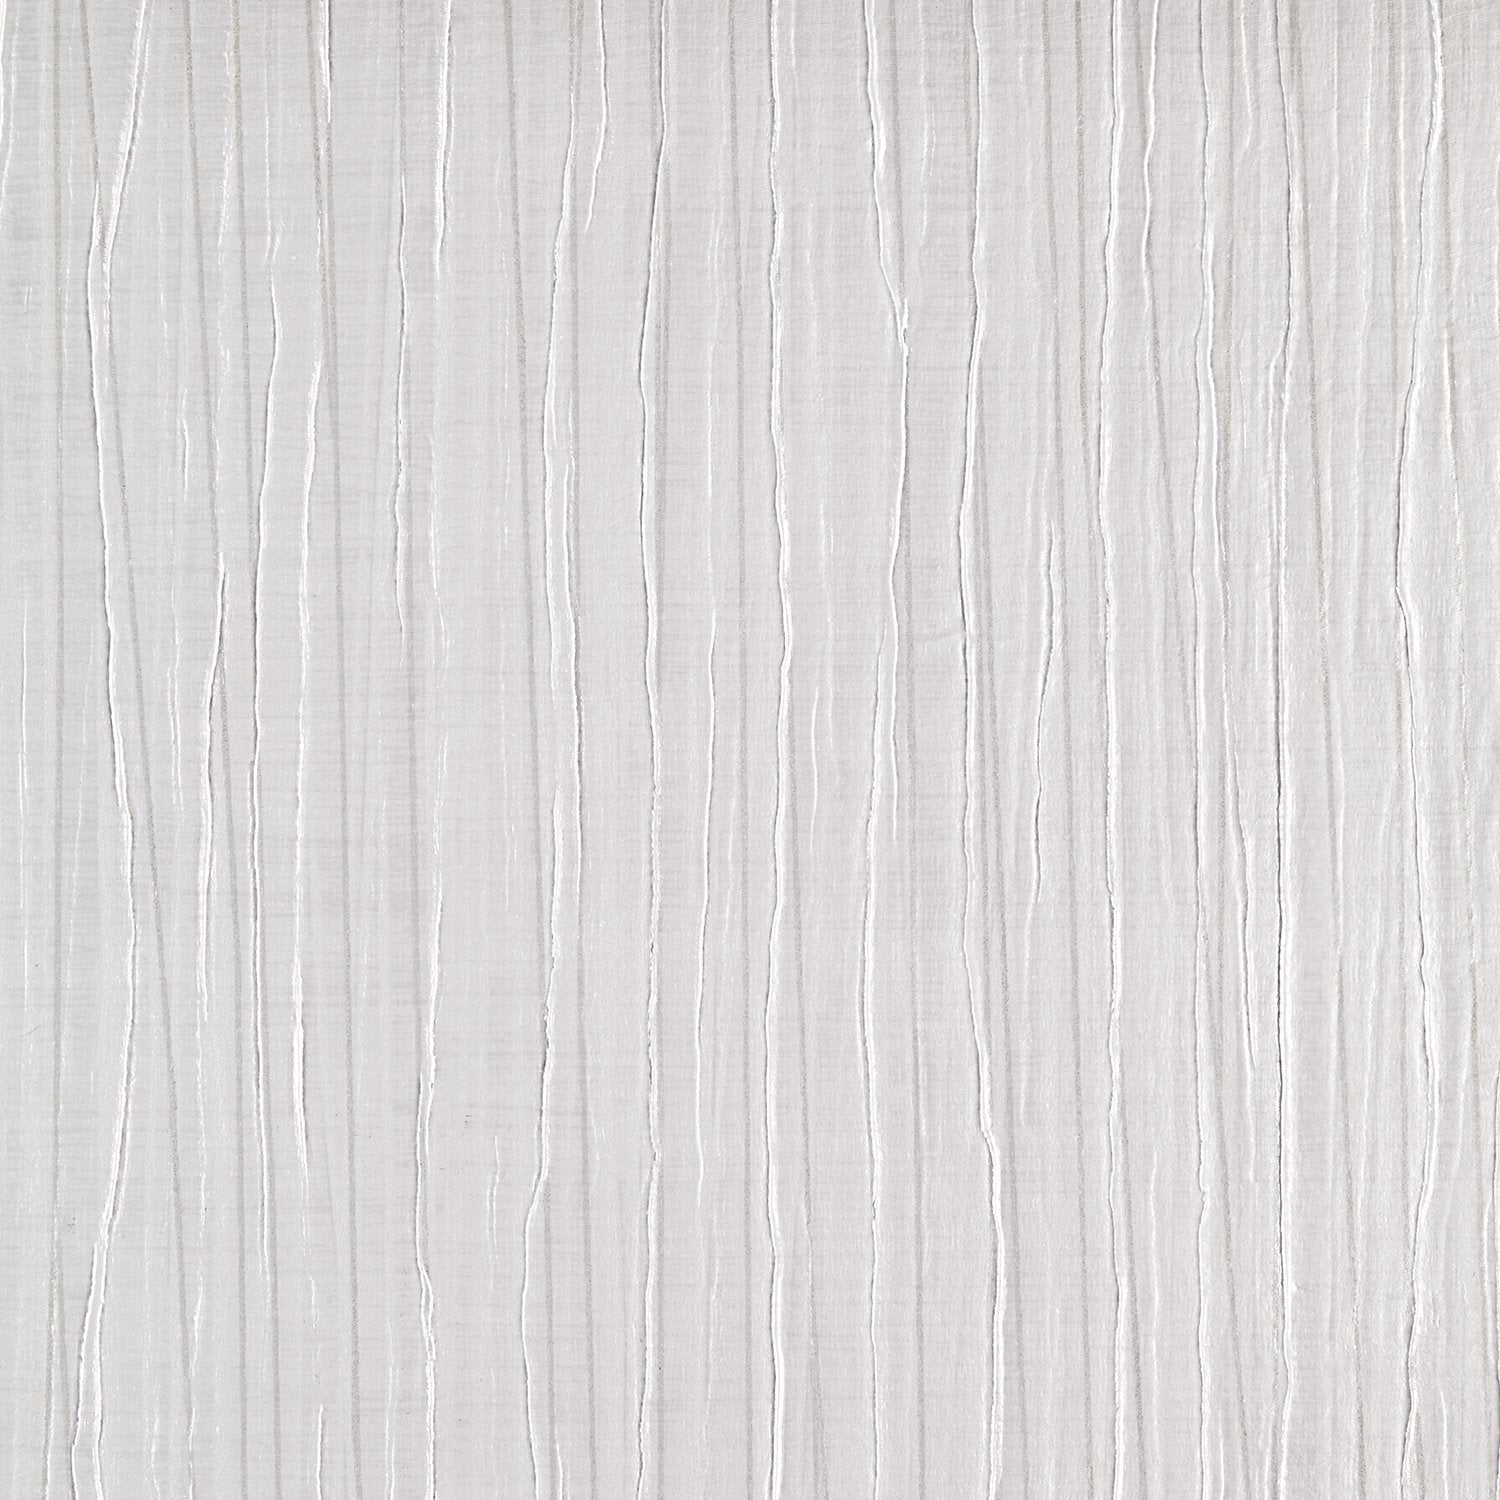 Vogue Pleat - Y47013 - Wallcovering - Vycon - Kube Contract